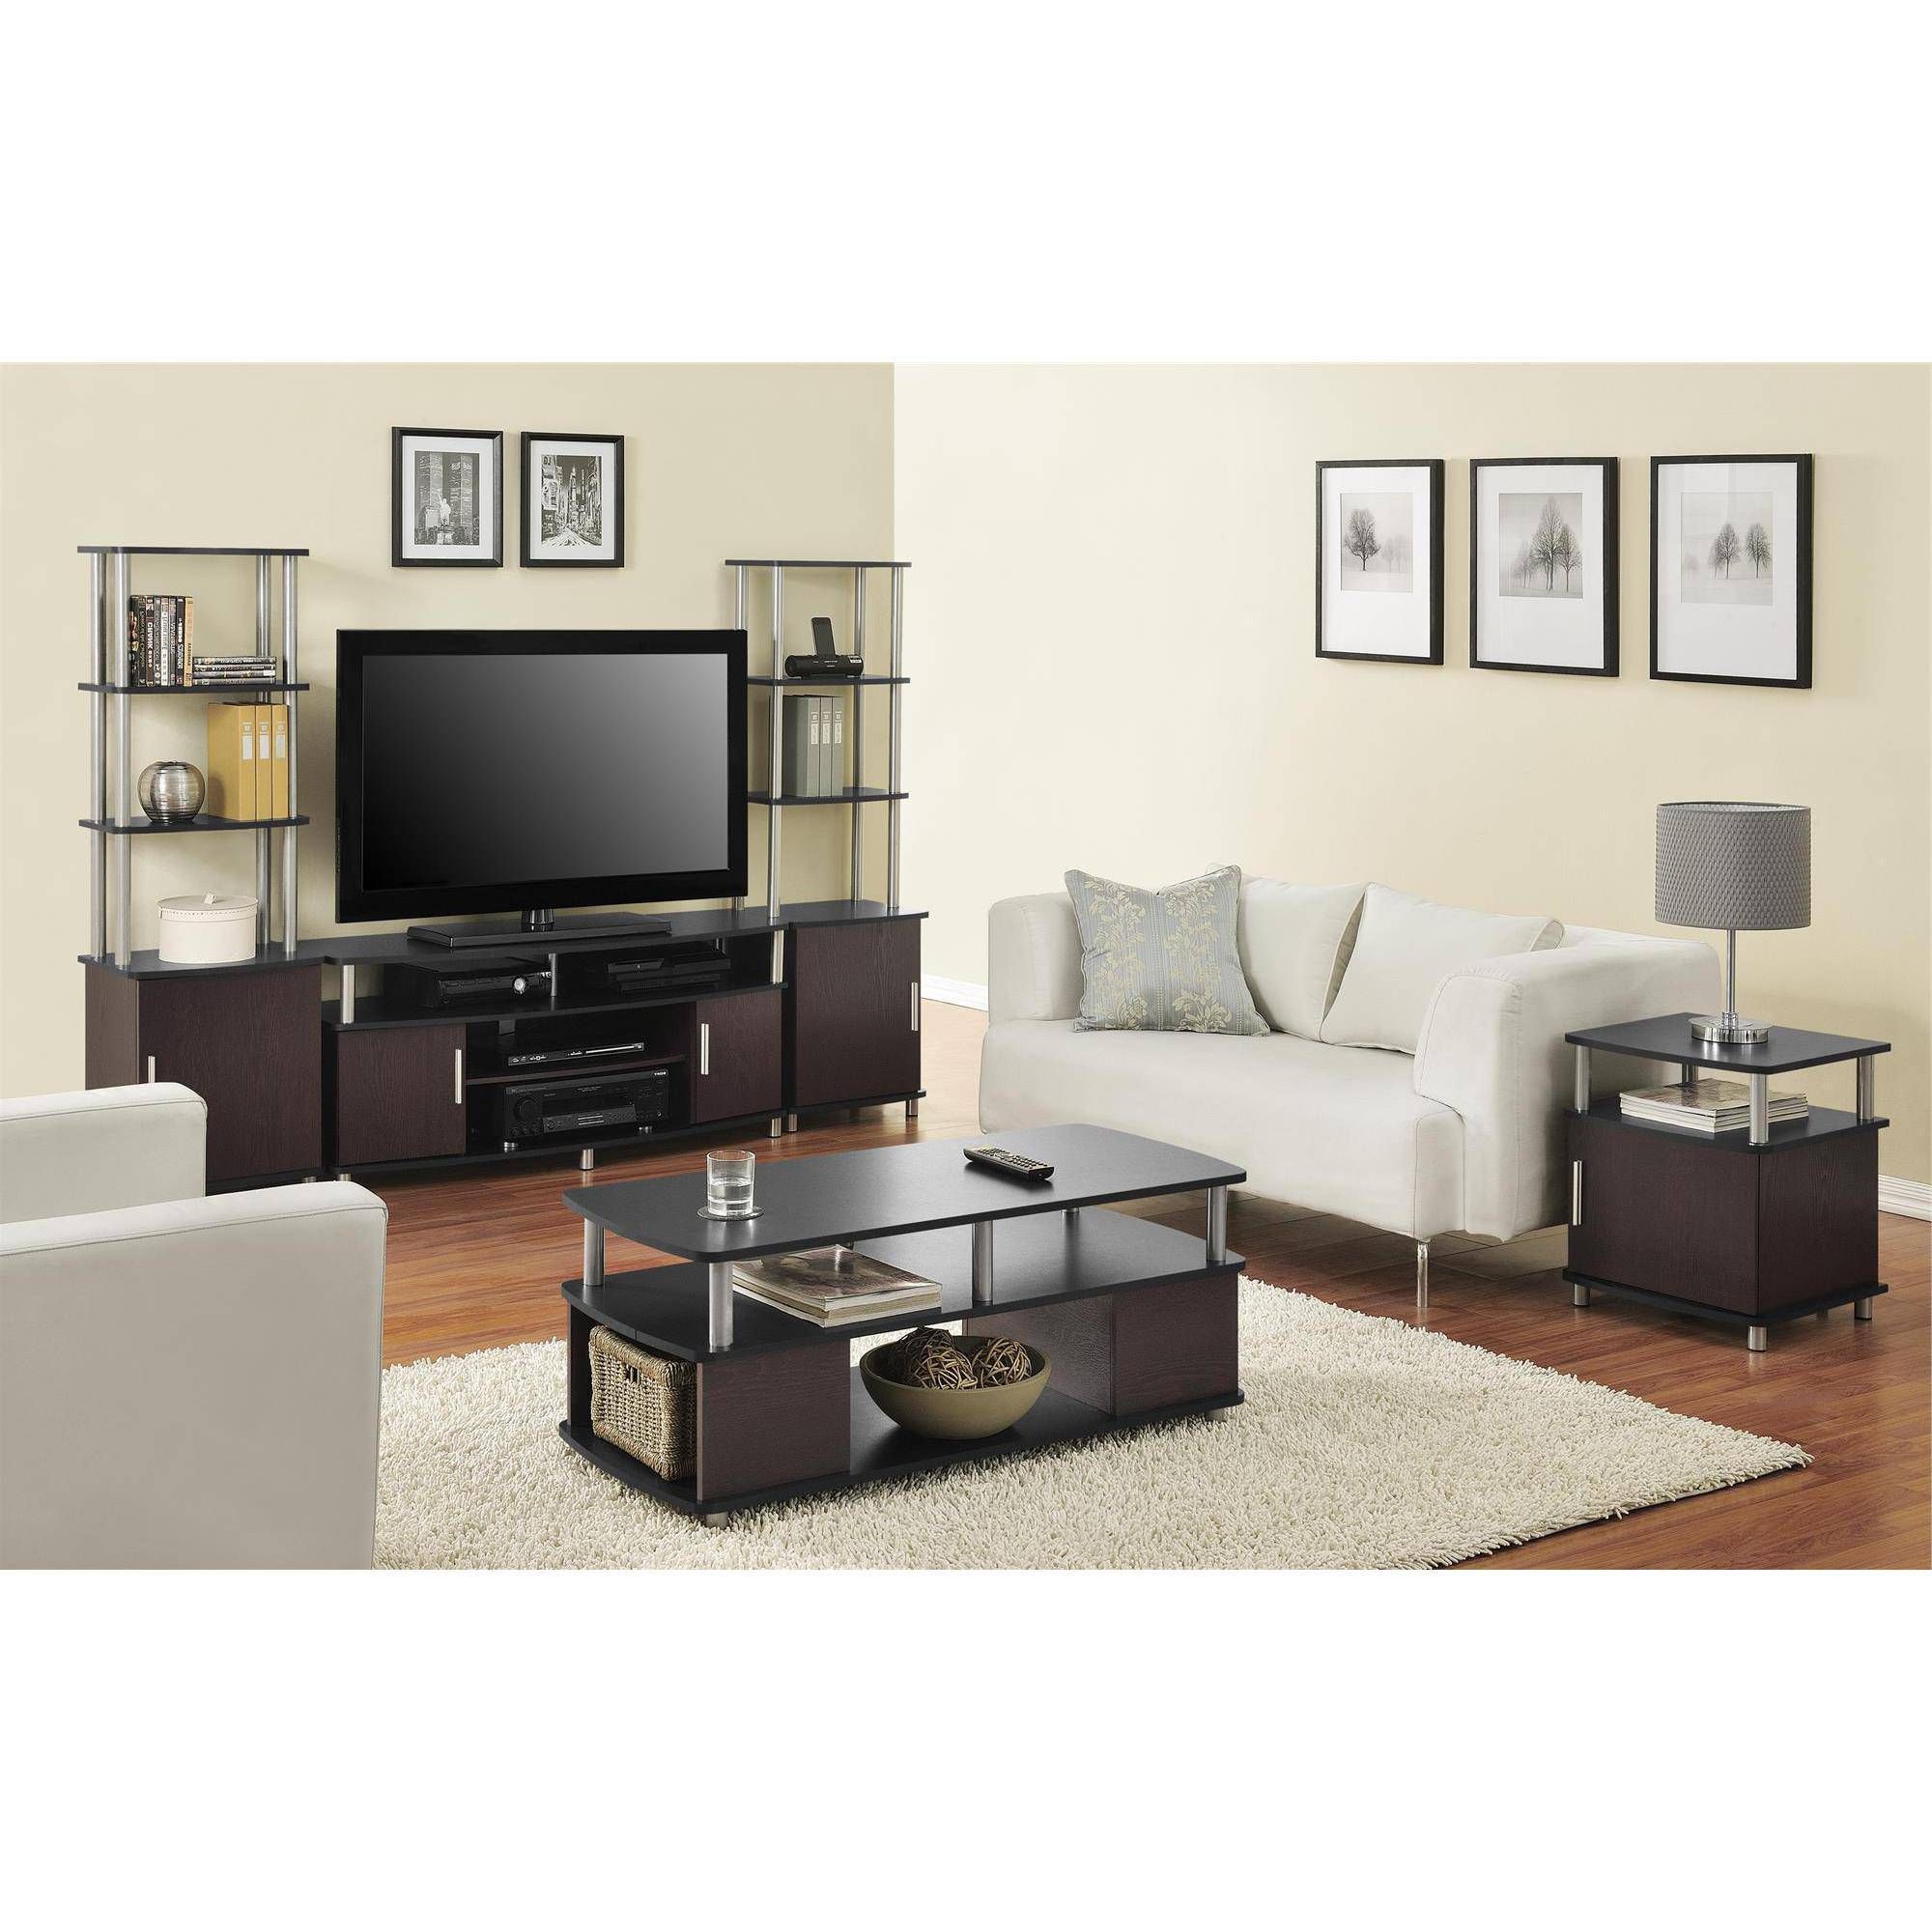 Recent Matching Tv Stand And Computer Desk Can I Use A Coffee Table As Regarding Tv Unit And Coffee Table Sets (Photo 7 of 20)